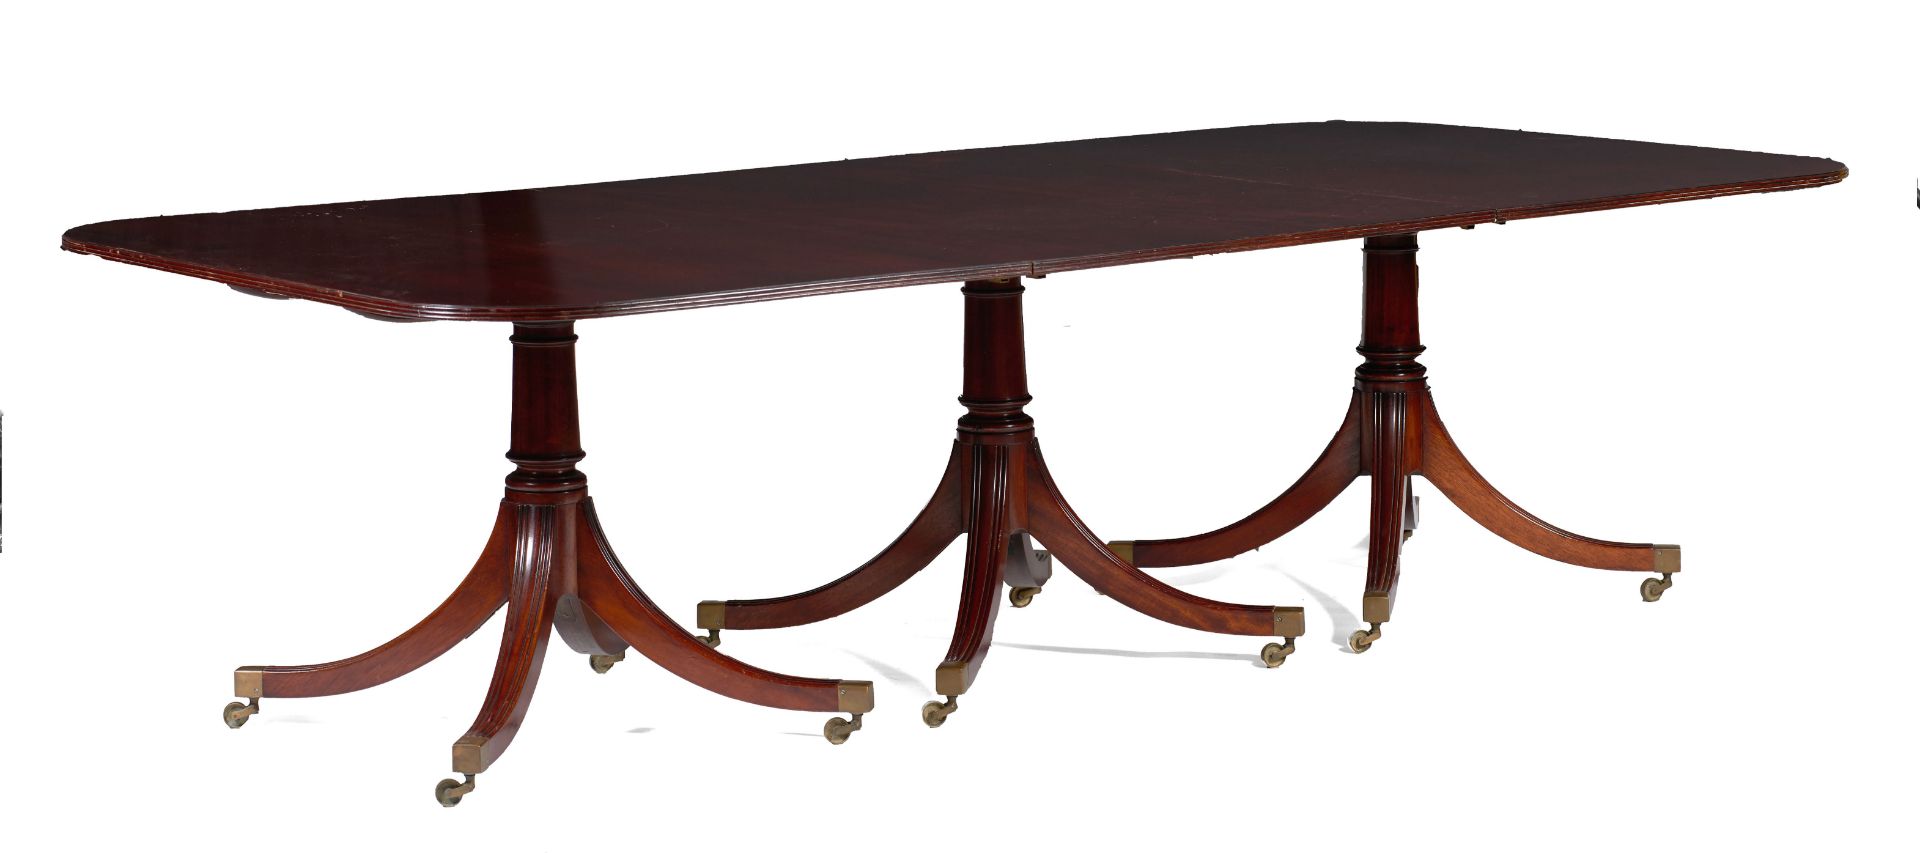 An English dining table